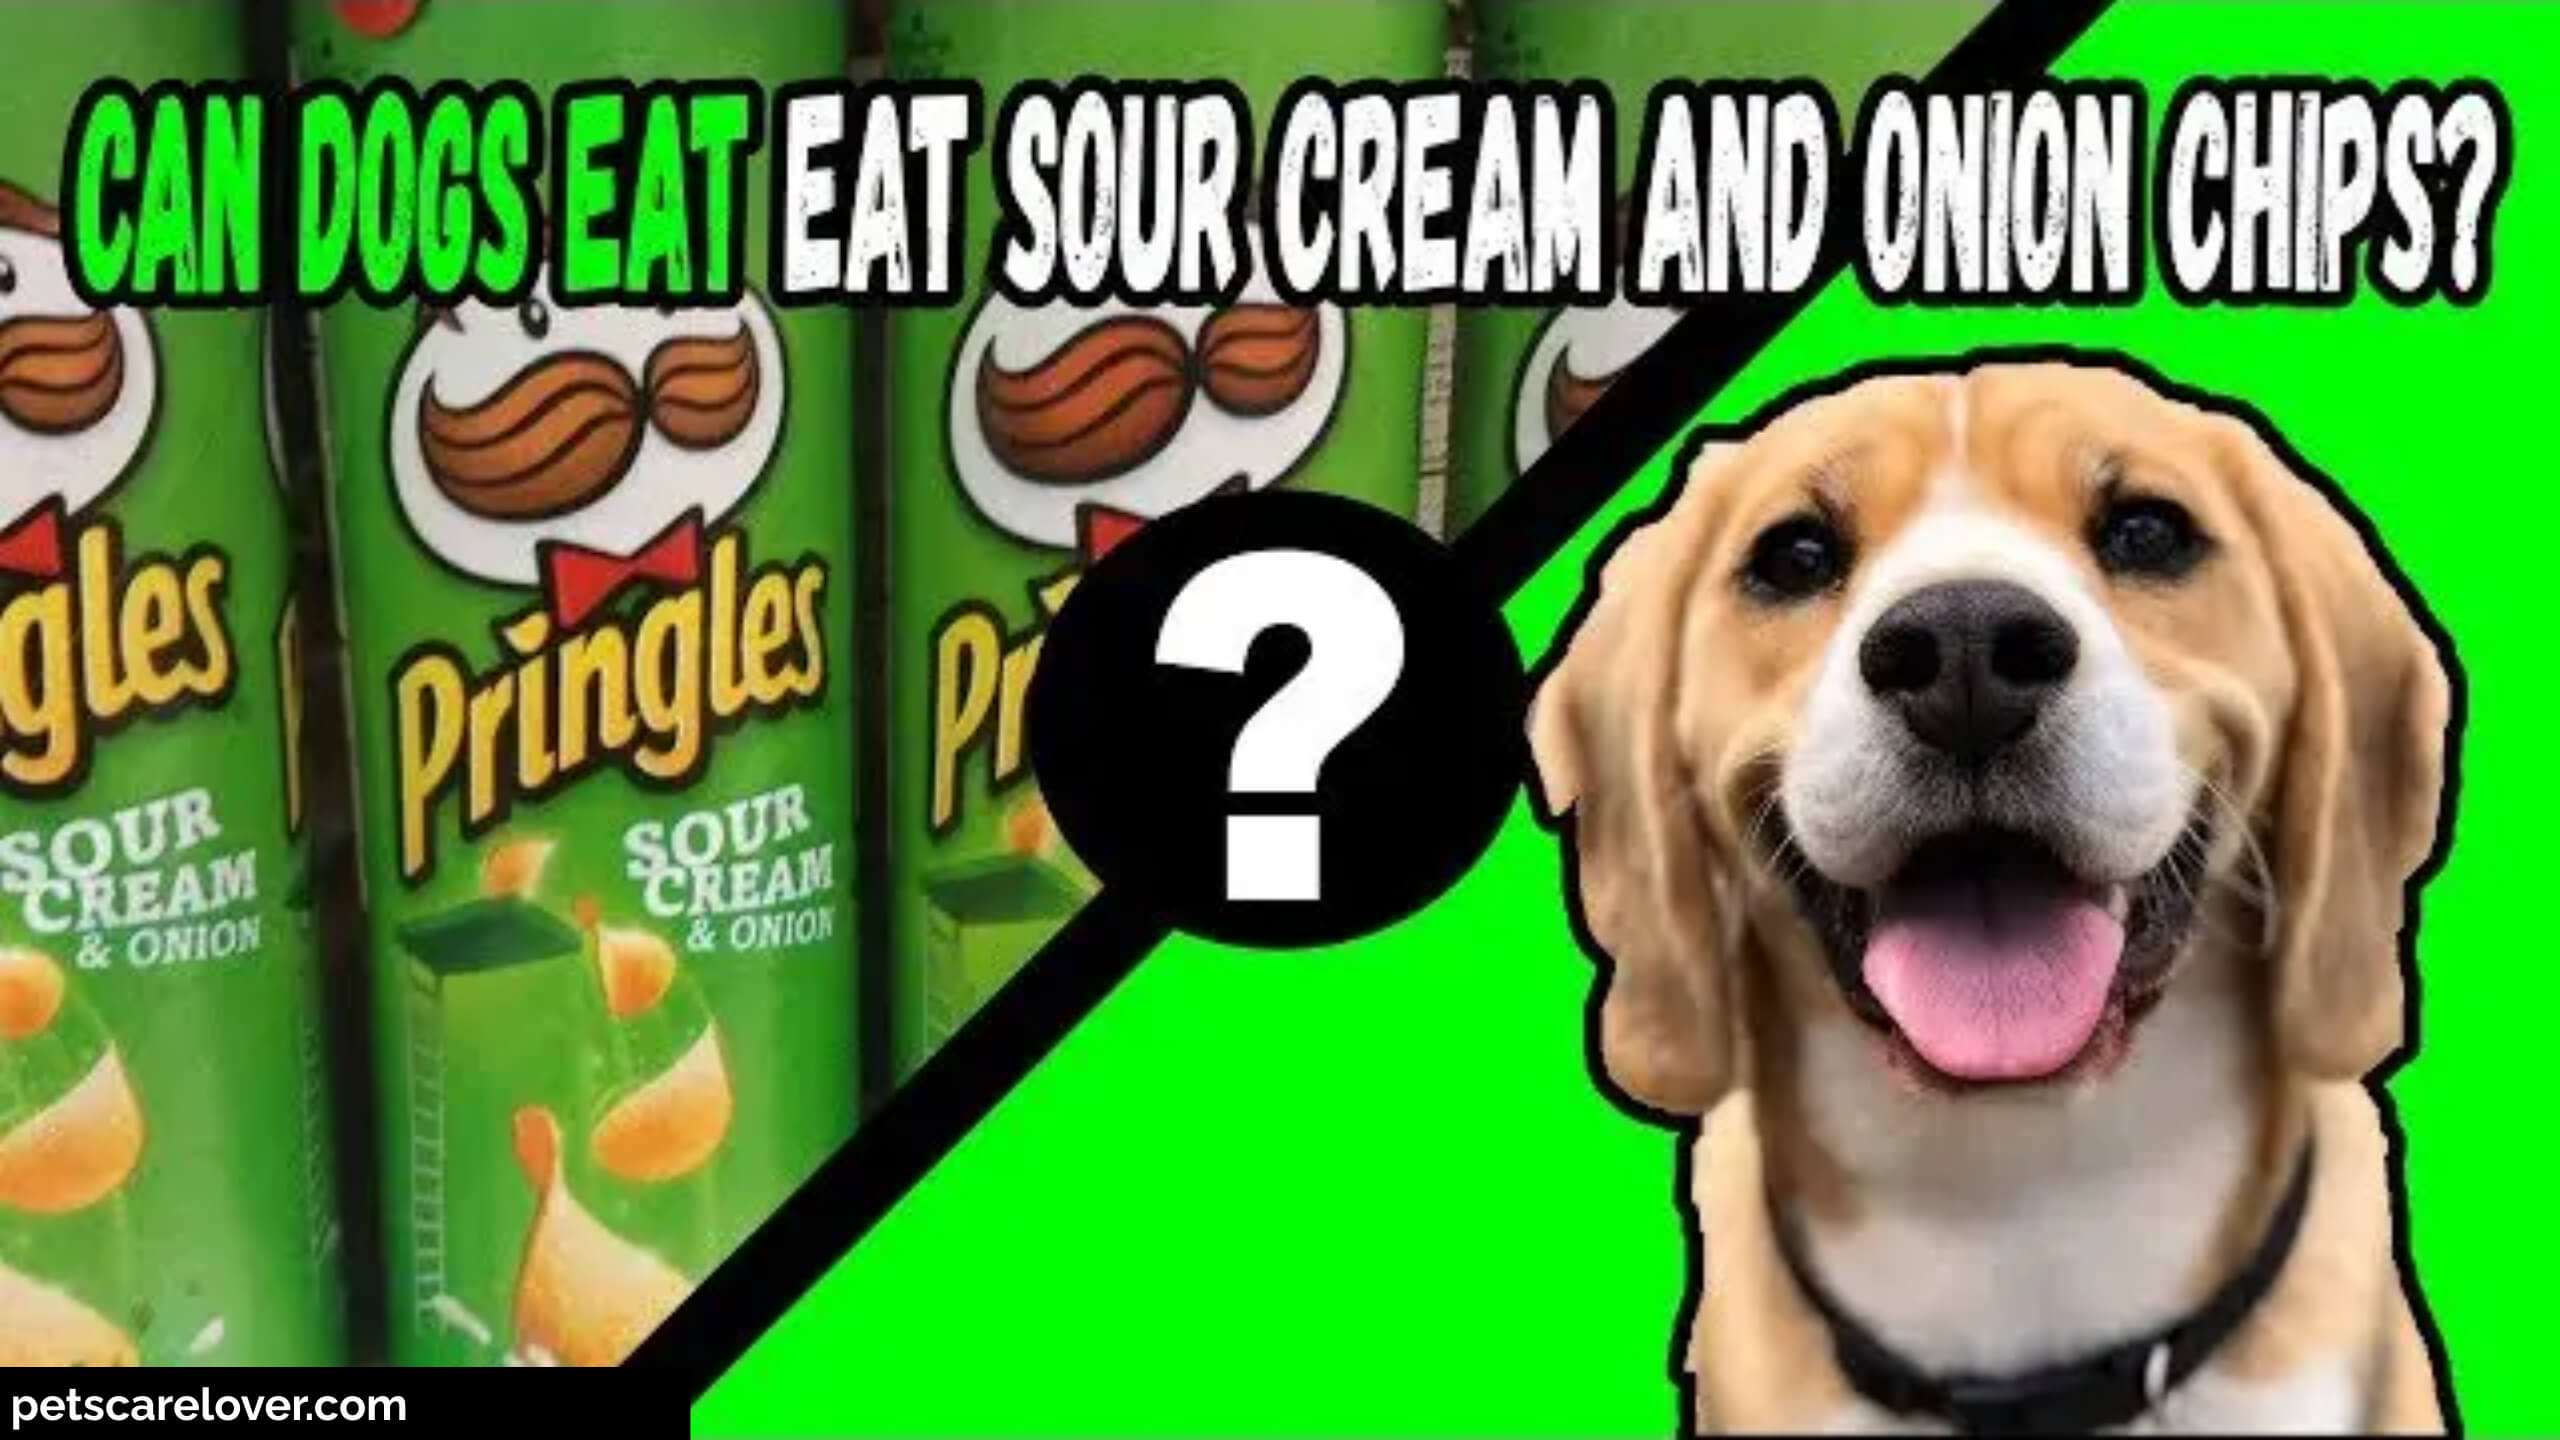 Can dogs eat sour cream and onion chips